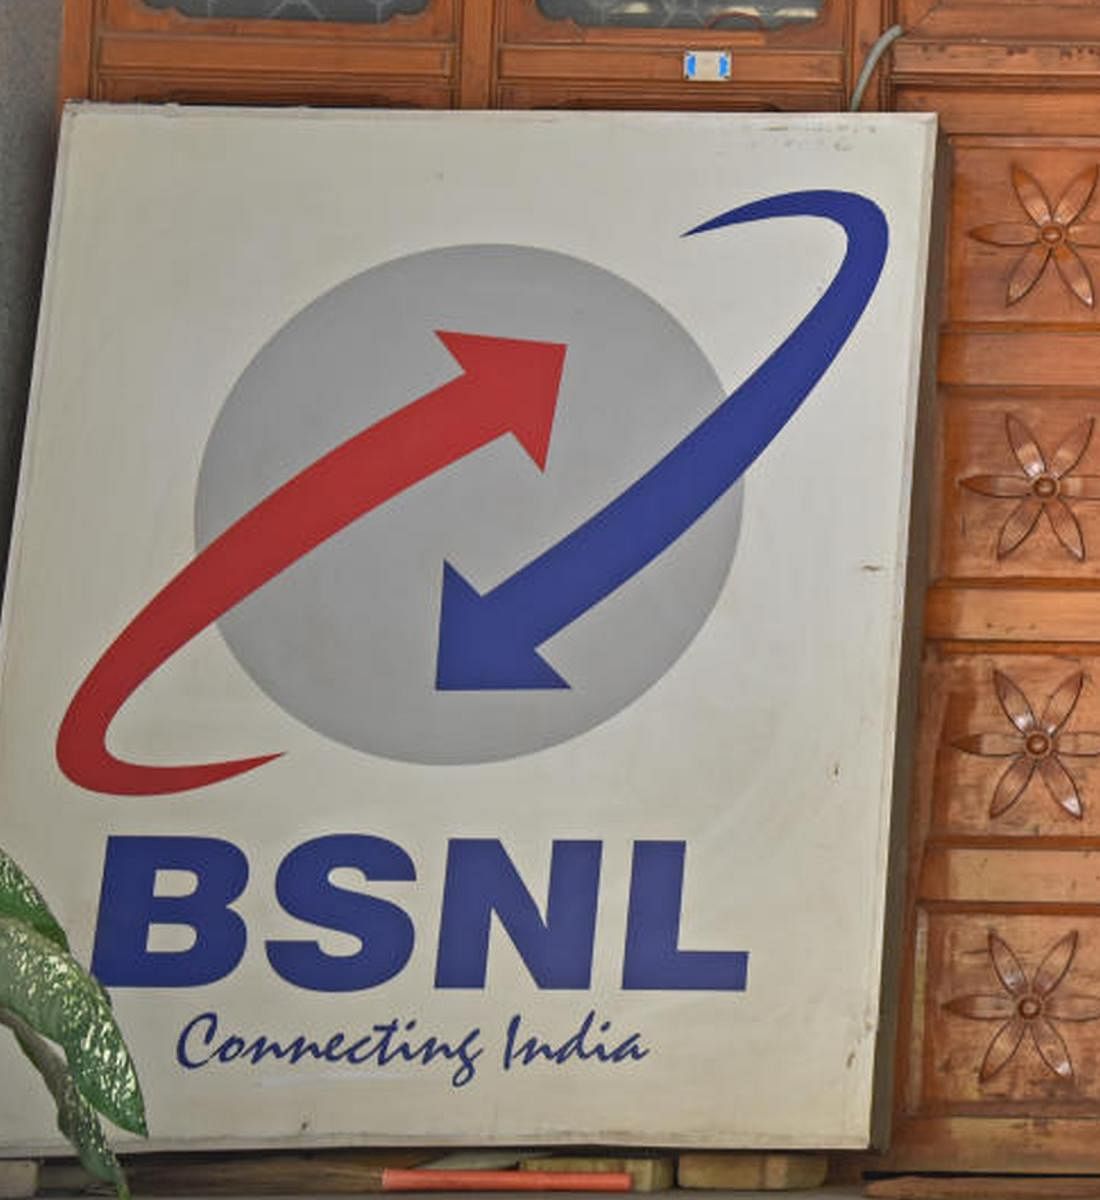 BSNL expects to garner more marketshare after Jio move